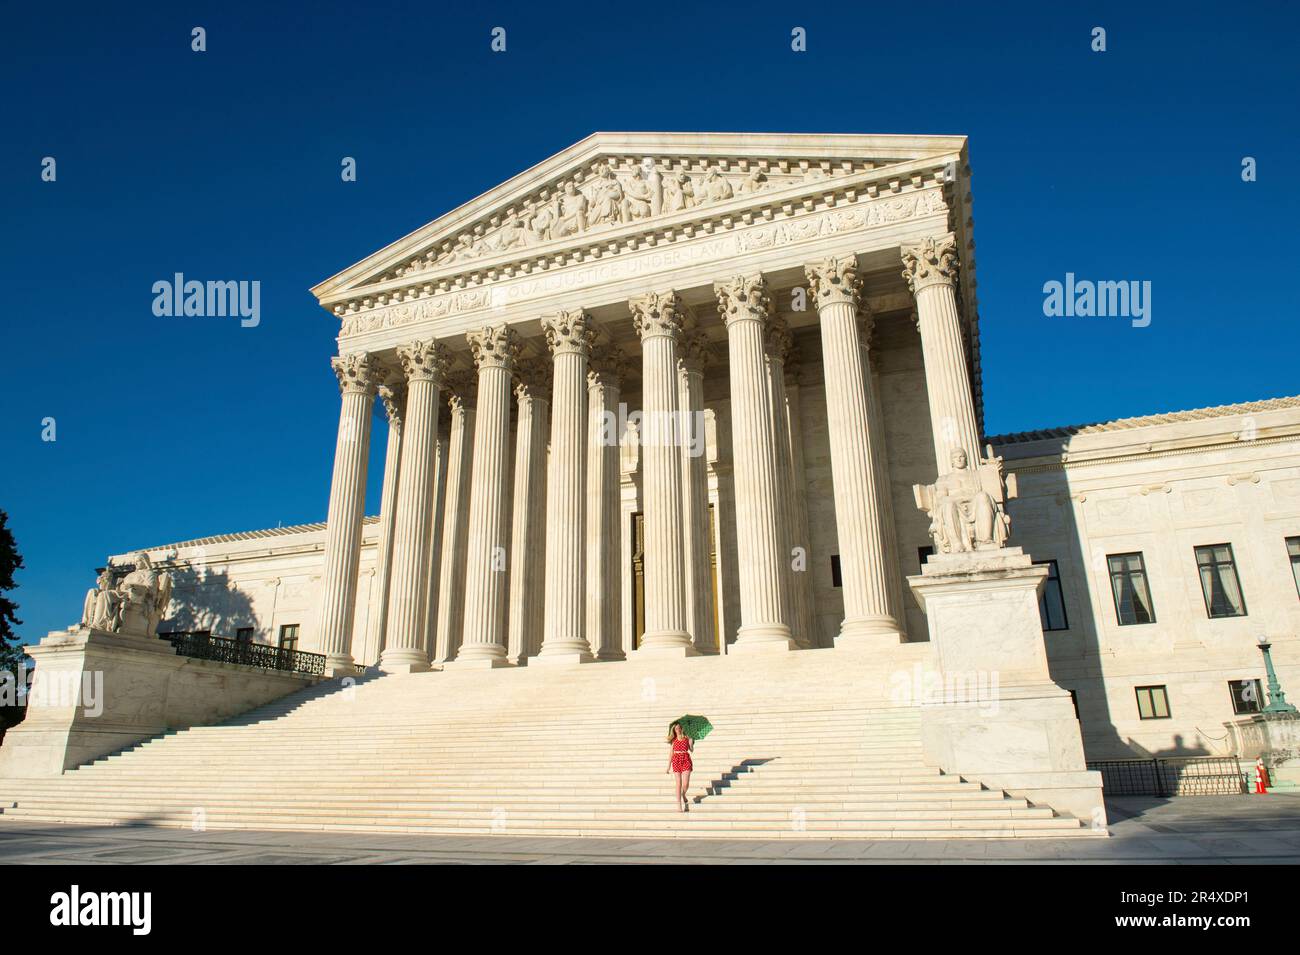 Woman with umbrella in vibrant color views walks up the steps of the U.S. Supreme Court in Washington, DC, USA Stock Photo